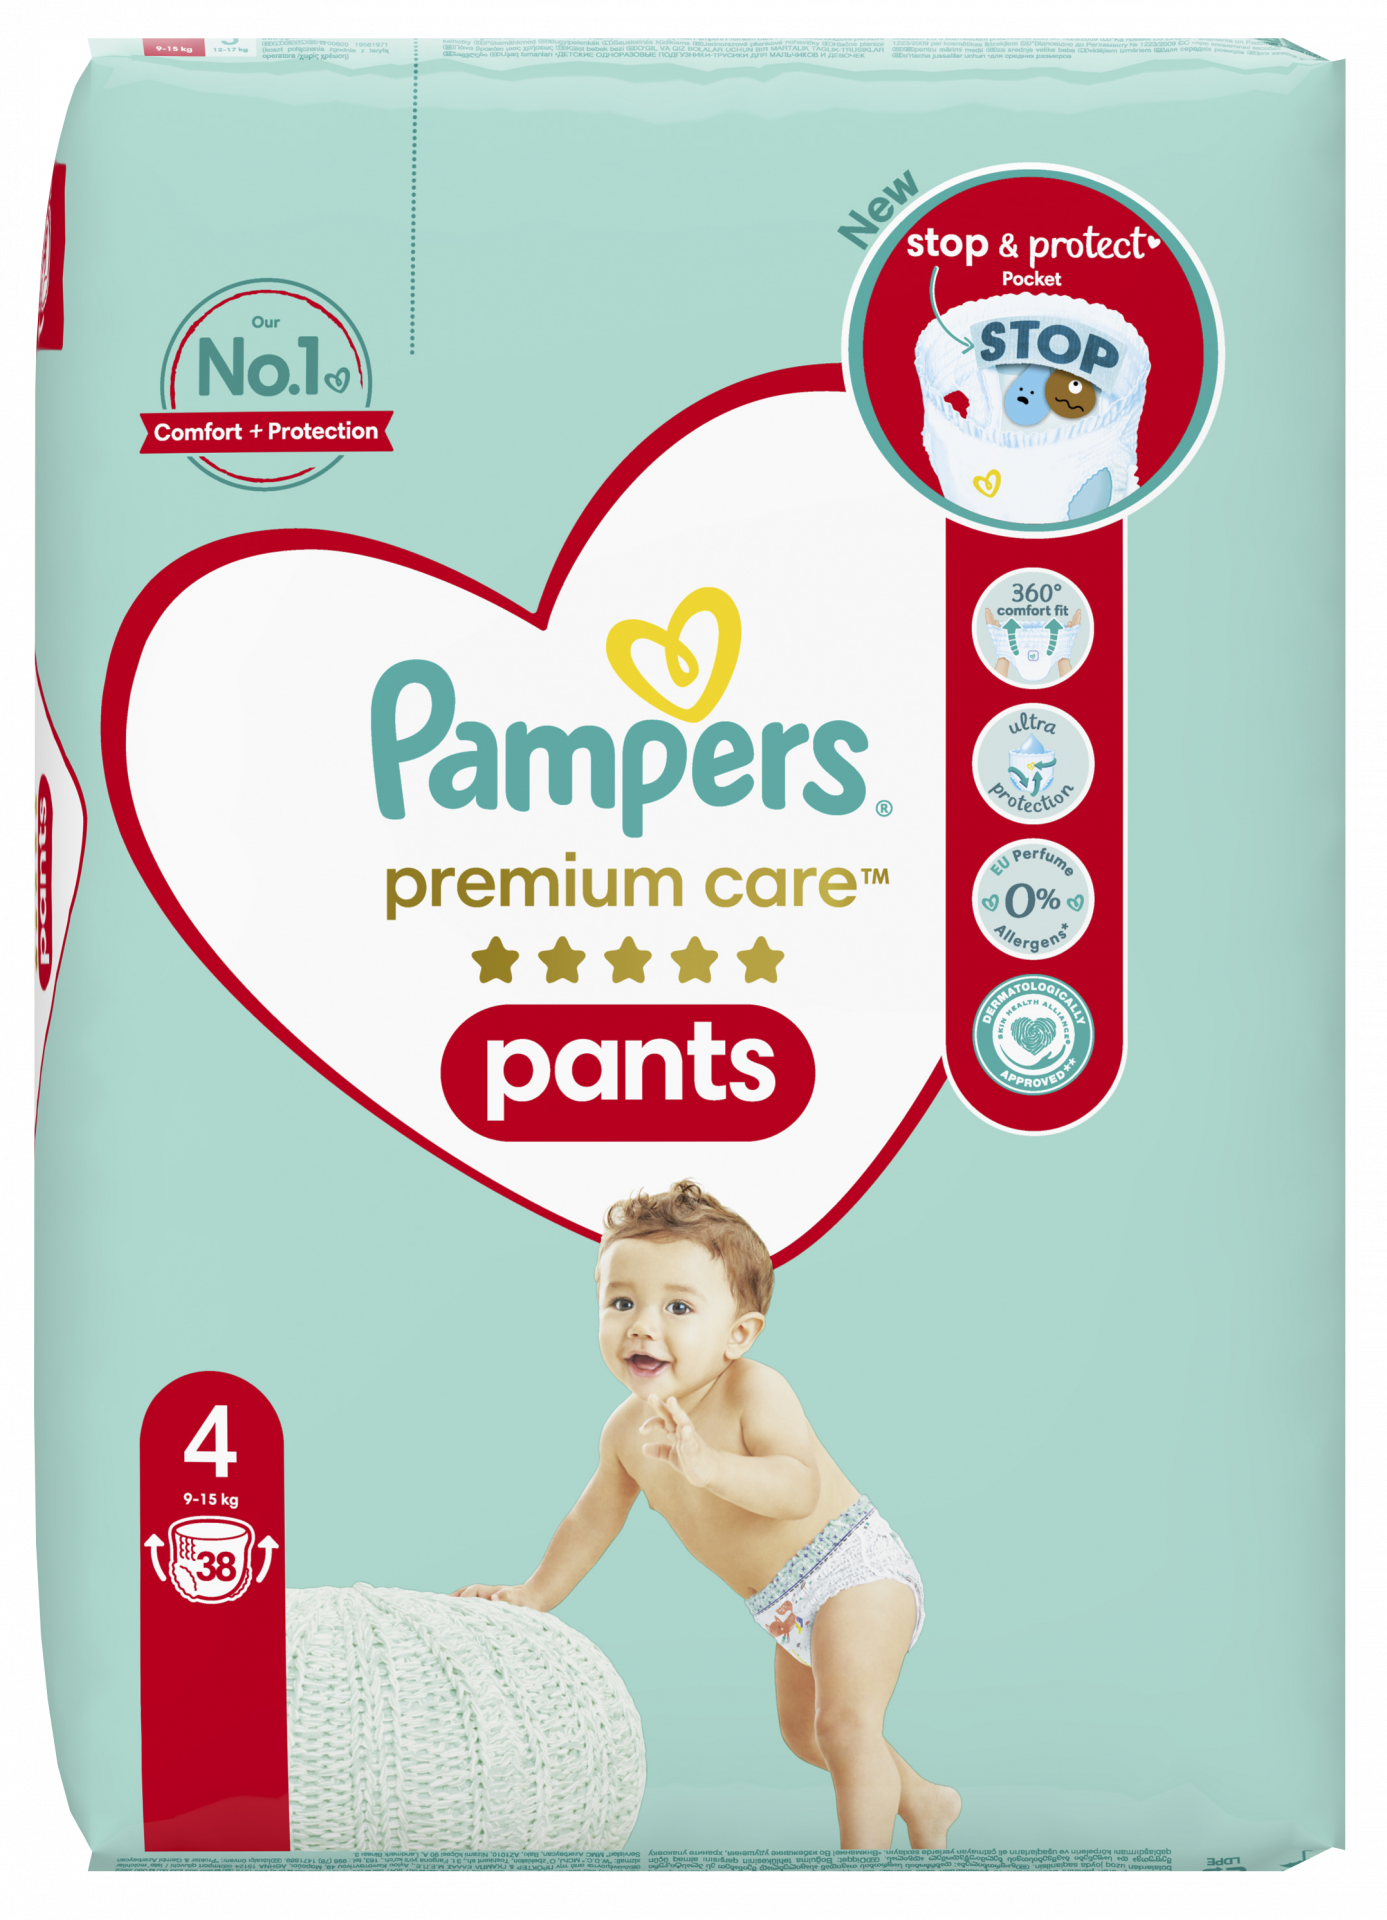 Pampers Harmonie (pure) diapers size 4, 9-14 kg, 28 pcs : : Baby  Products